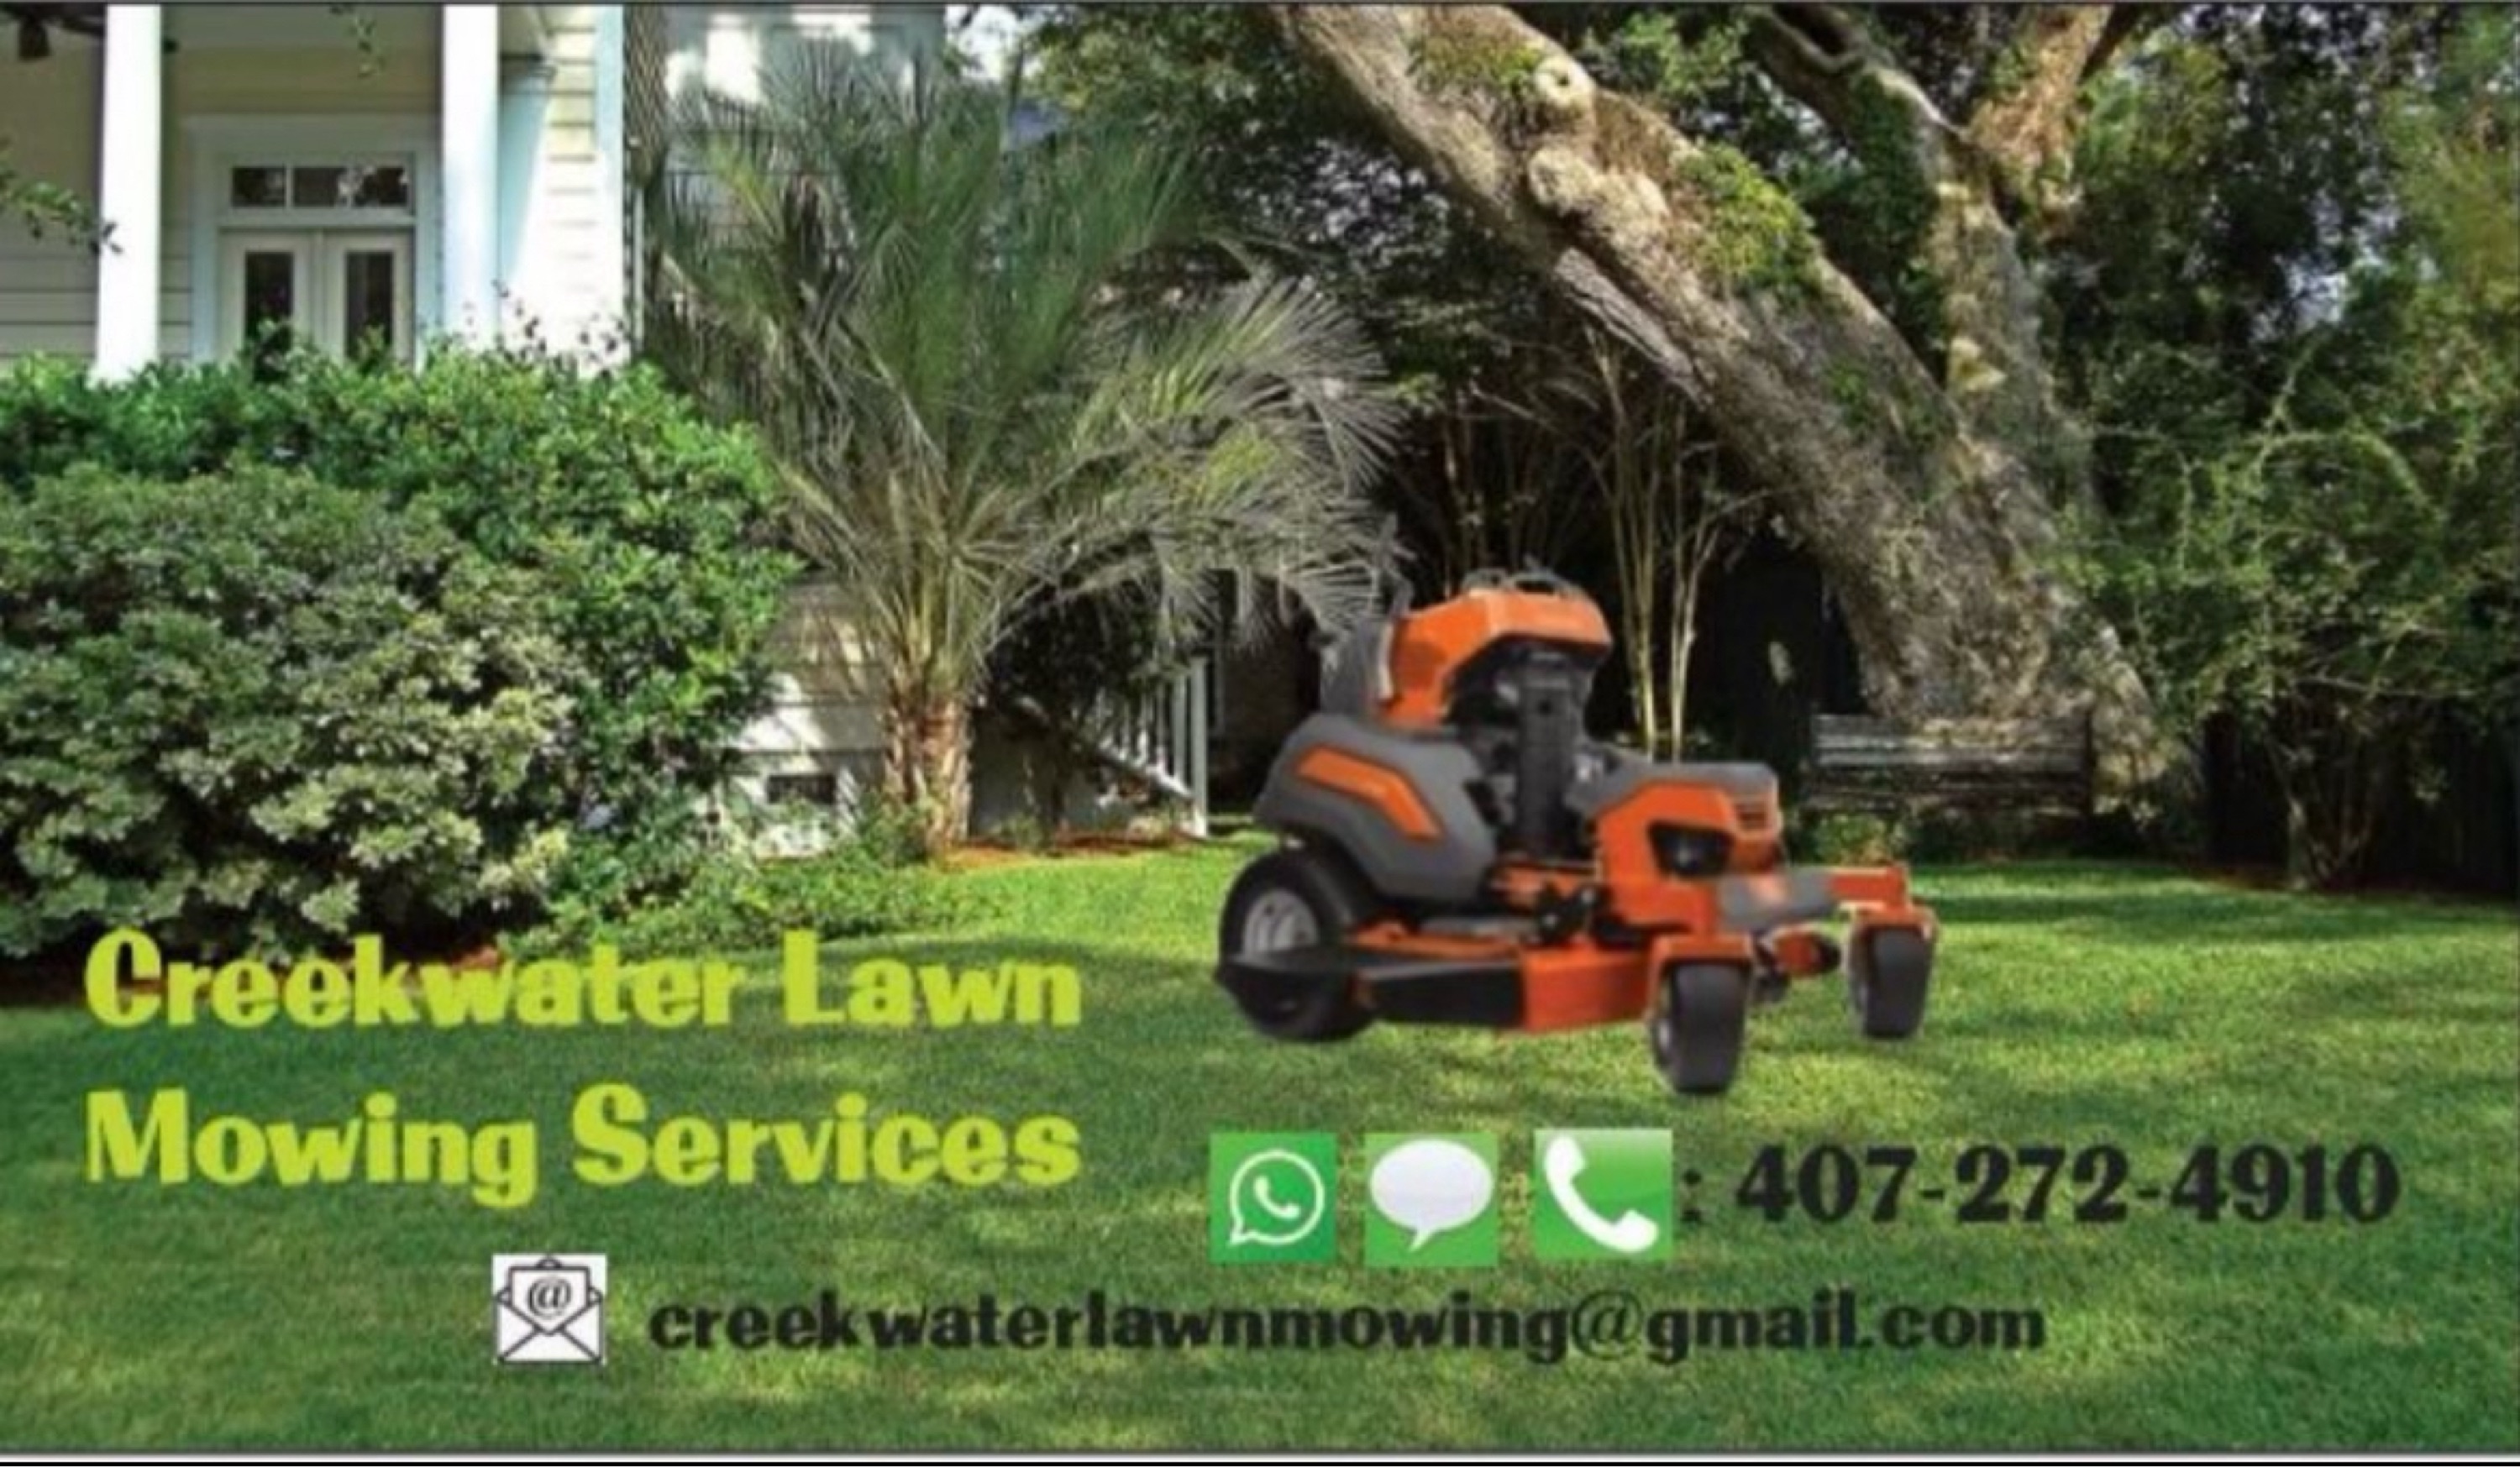 Creekwater Lawn Mowing Services Logo